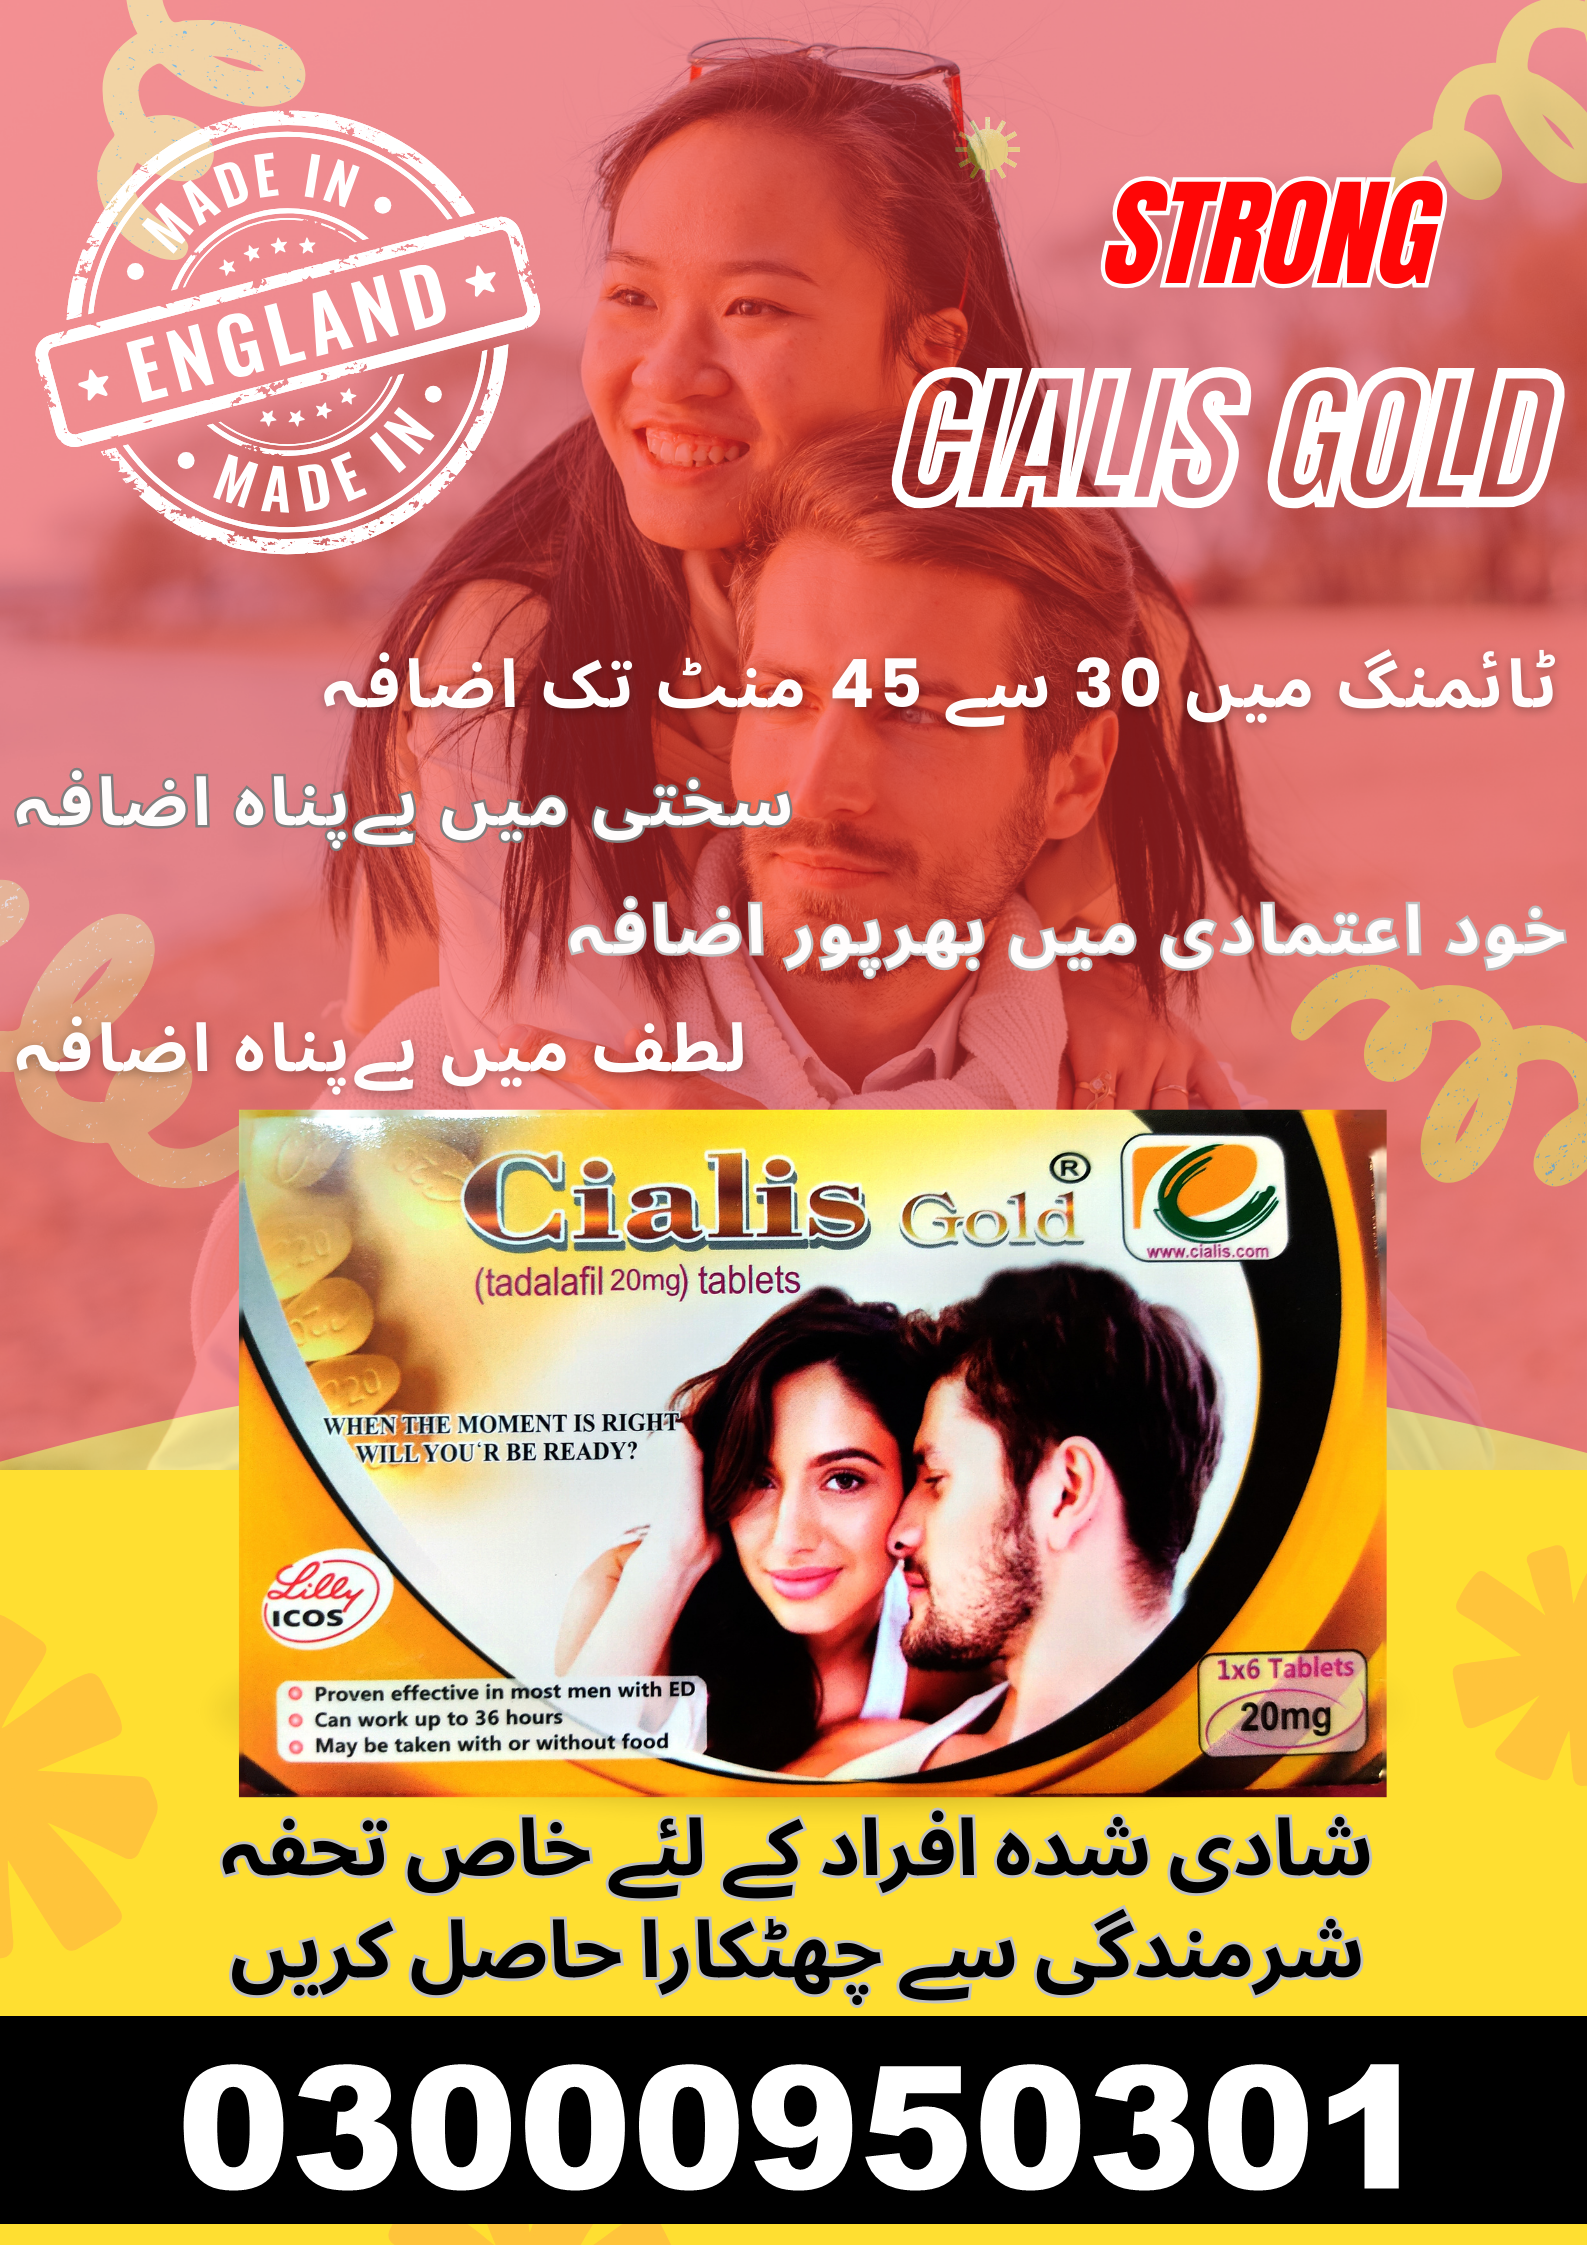 Cialis Gold 20mg In Faisalabad	 03000950301,Islamabad, Pakistan,Services,Free Classifieds,Post Free Ads,77traders.com